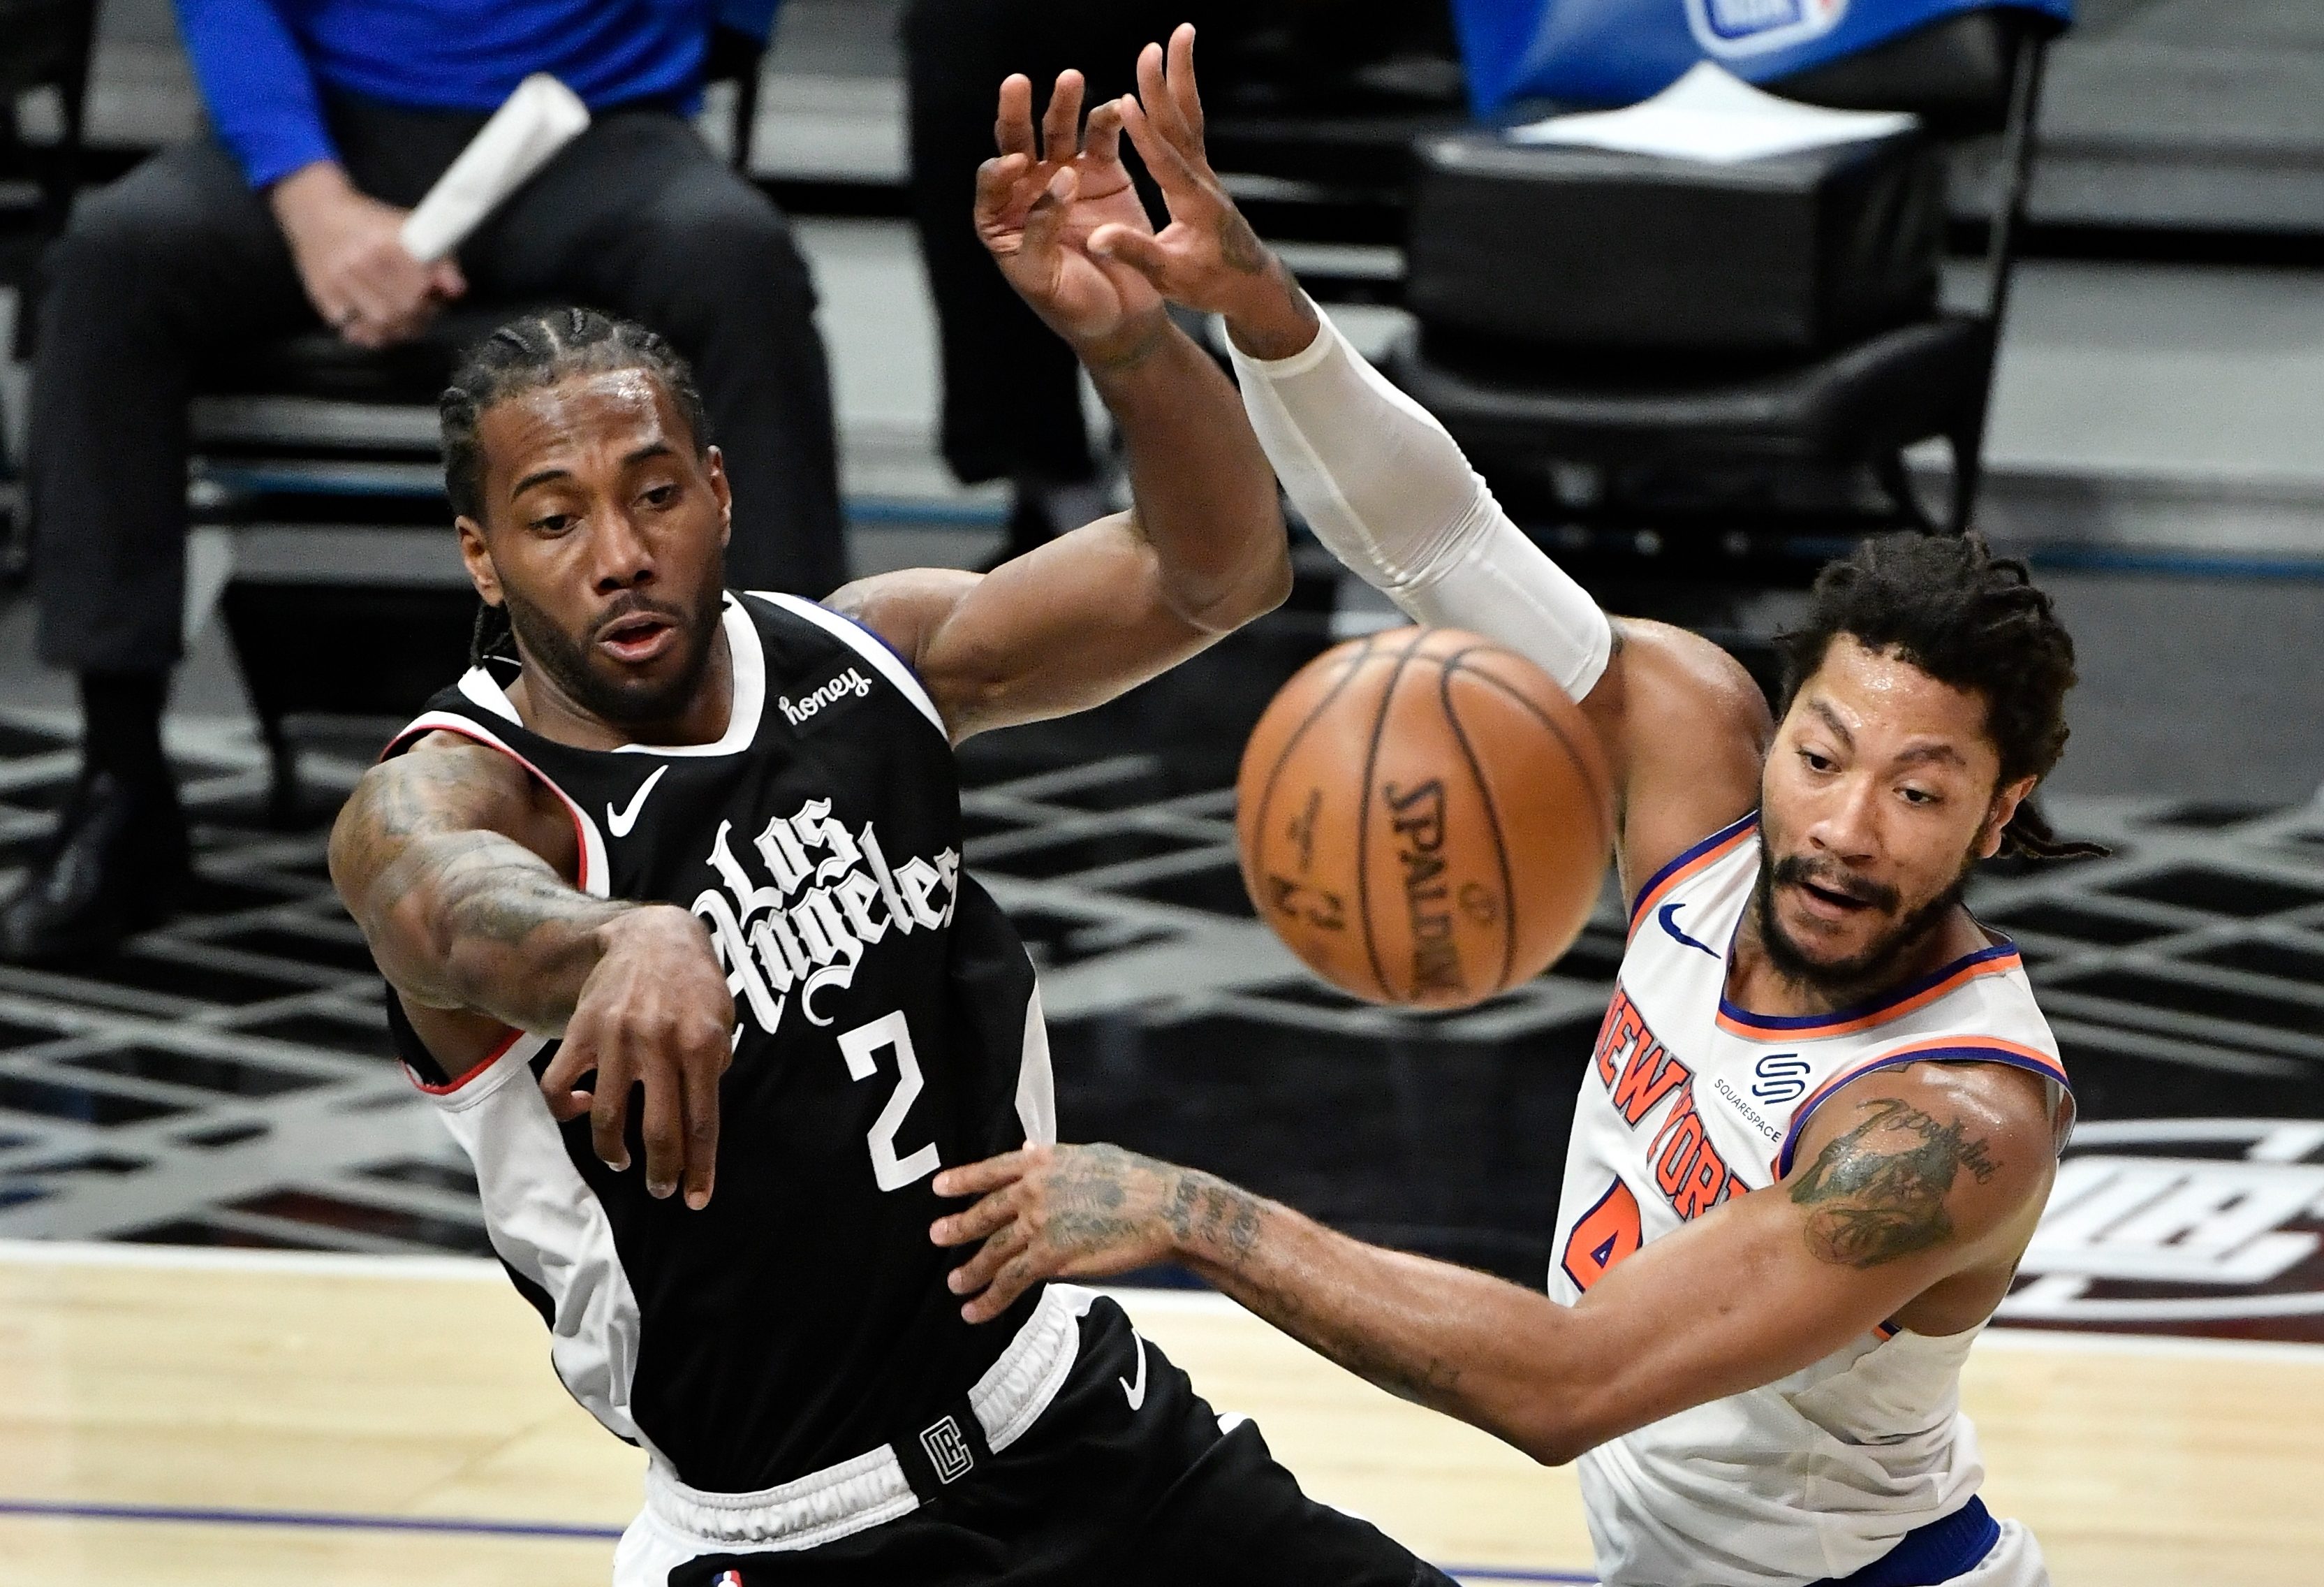 Derrick Rose paces Knicks’ upset of Clippers